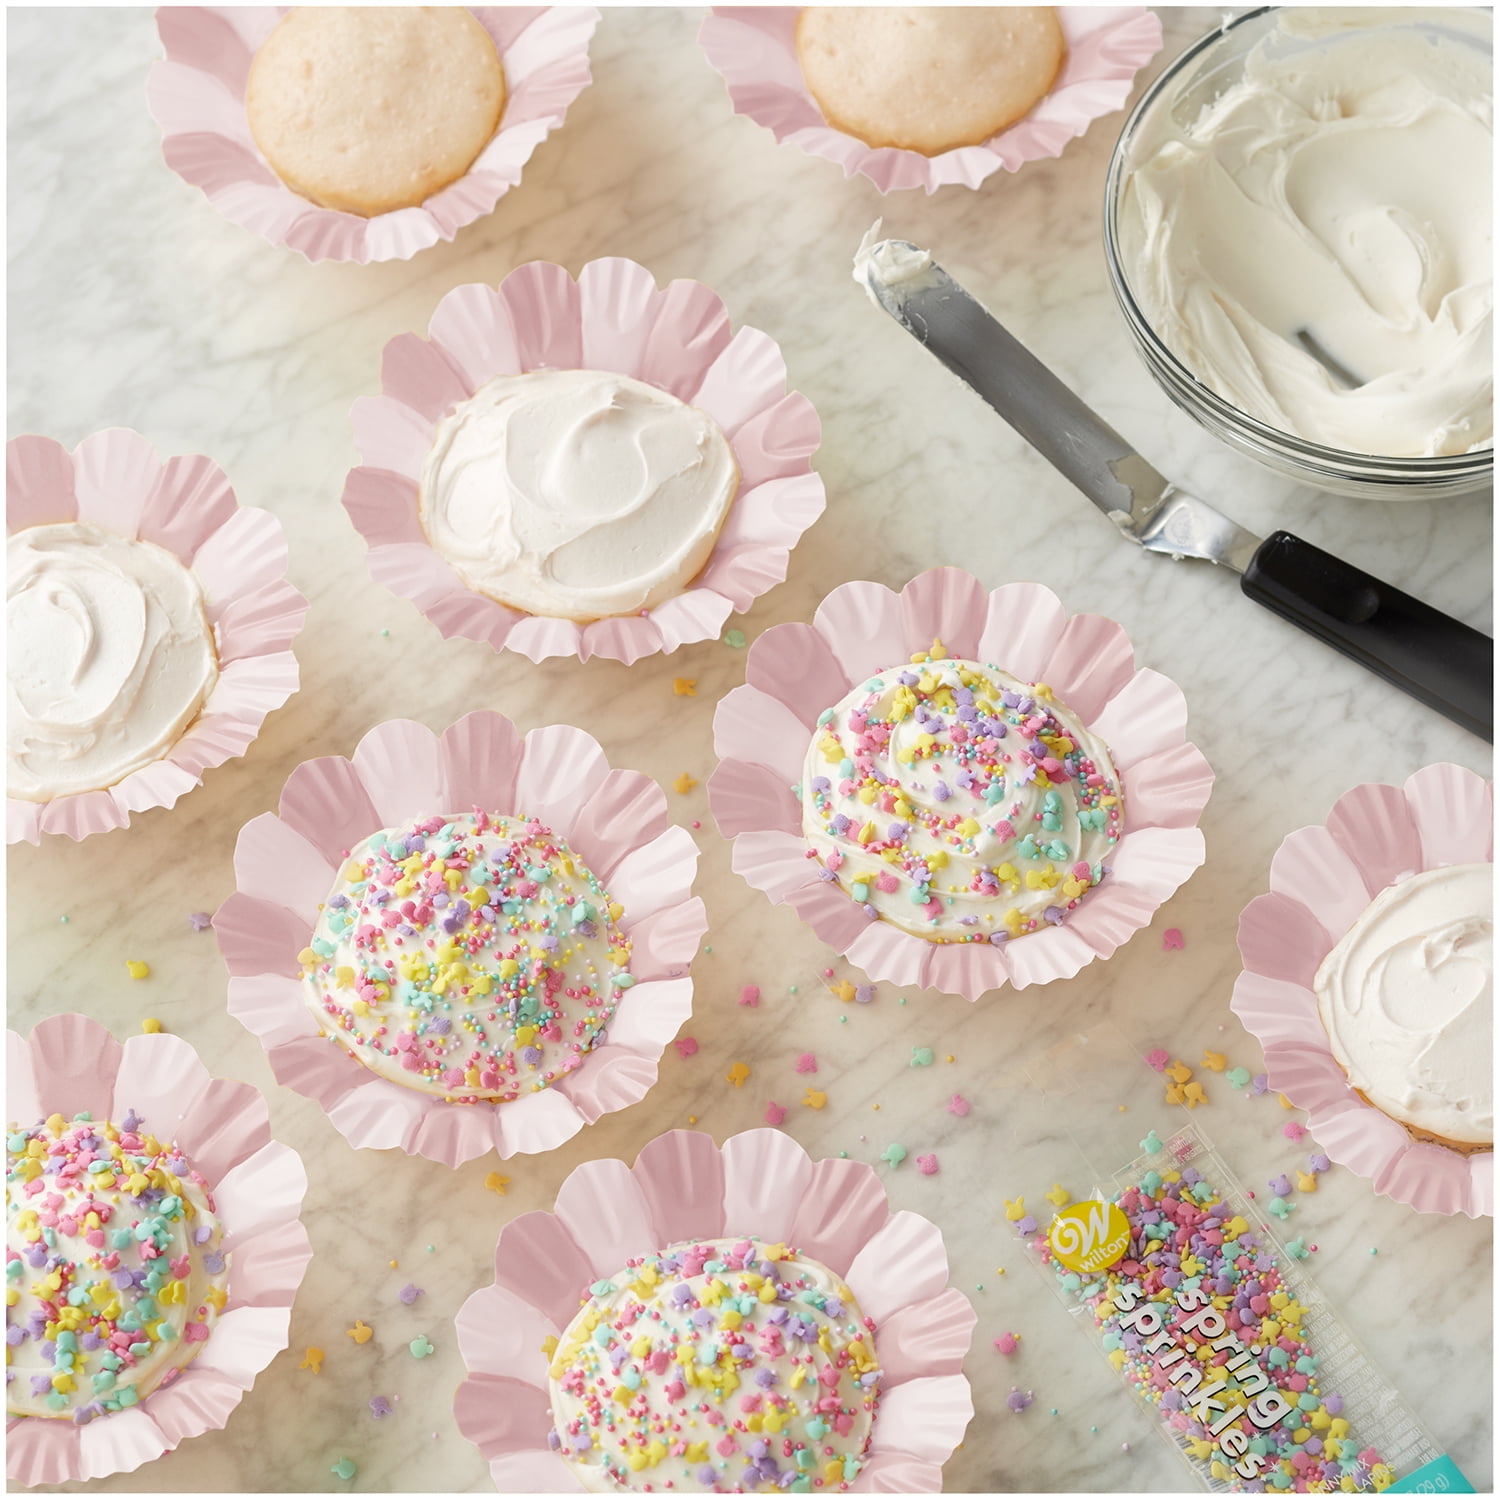 Multi Pastel Cupcake Liners (150 Count) - The Peppermill